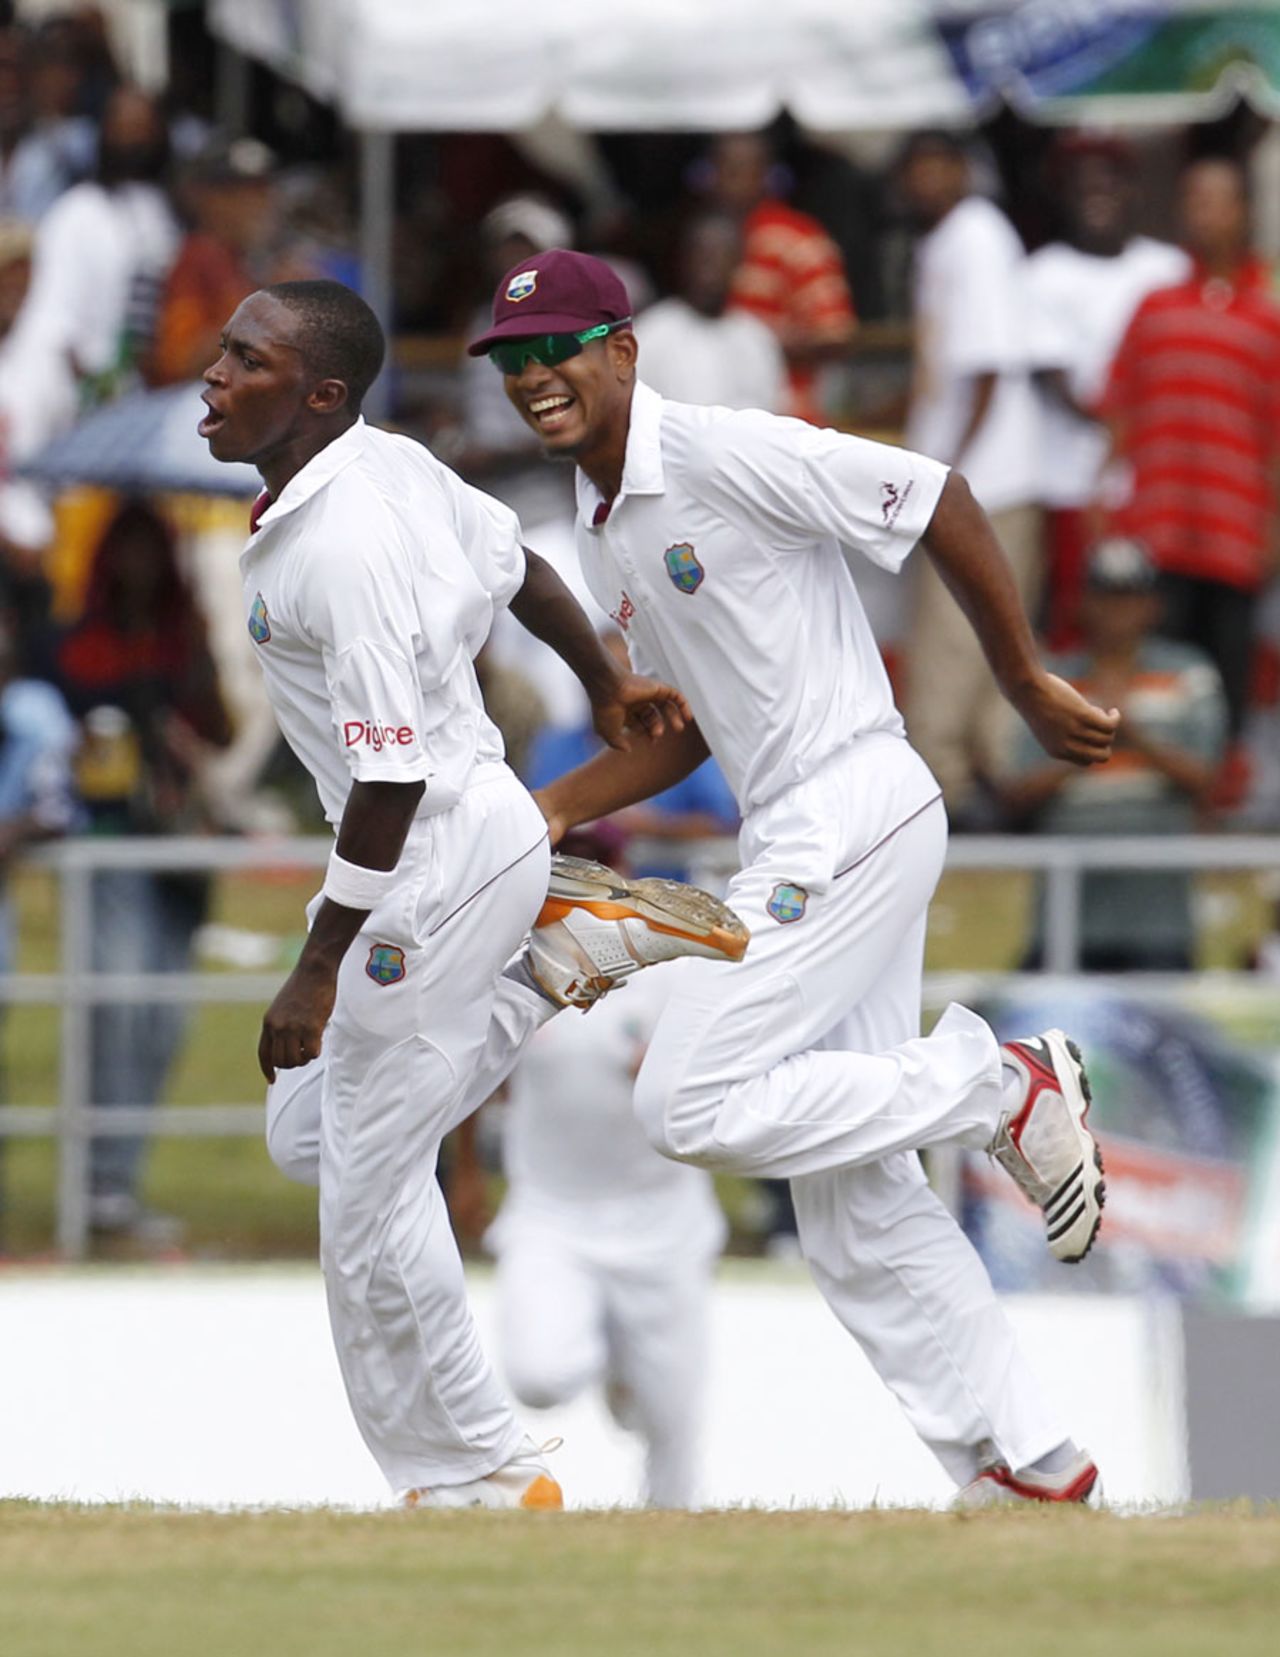 Fidel Edwards is pumped up after dismissing Abhinav Mukund for a duck, West Indies v India, 3rd Test, Dominica, 5th day, July 10, 2011